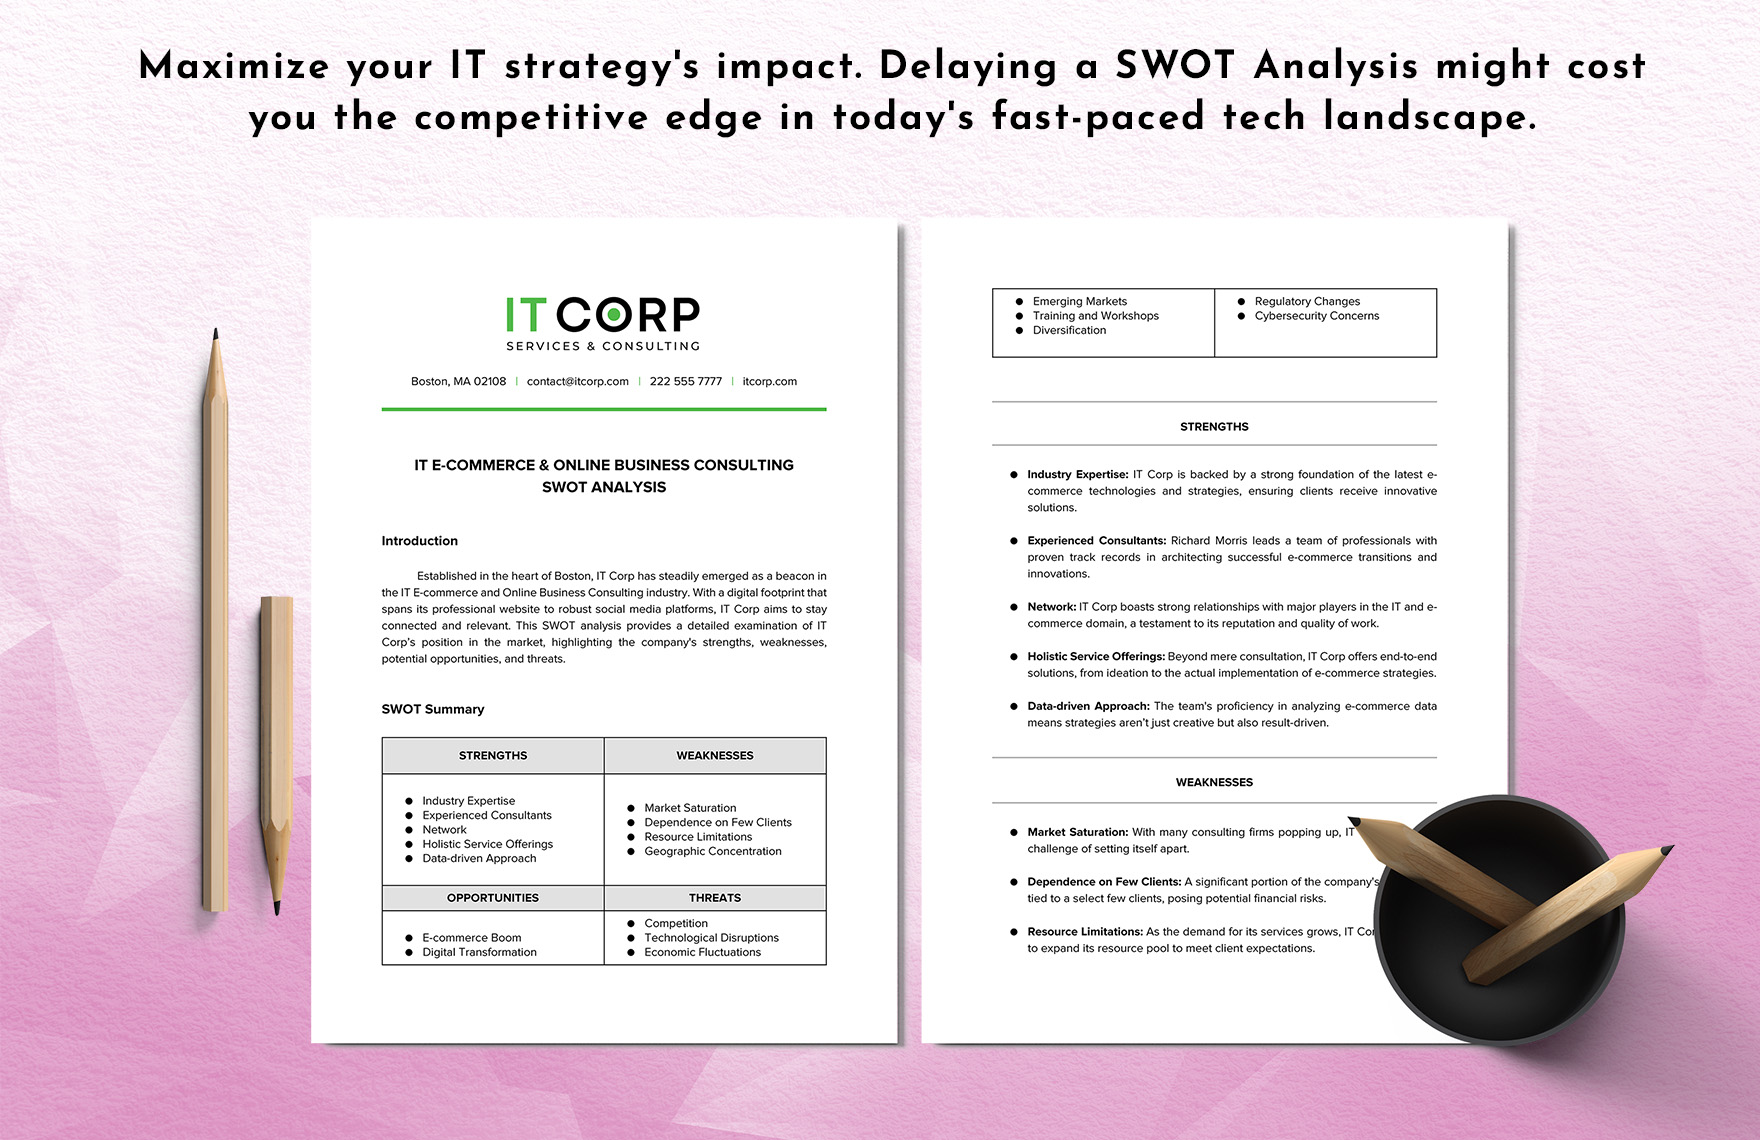 IT E-commerce & Online Business Consulting SWOT Analysis Template